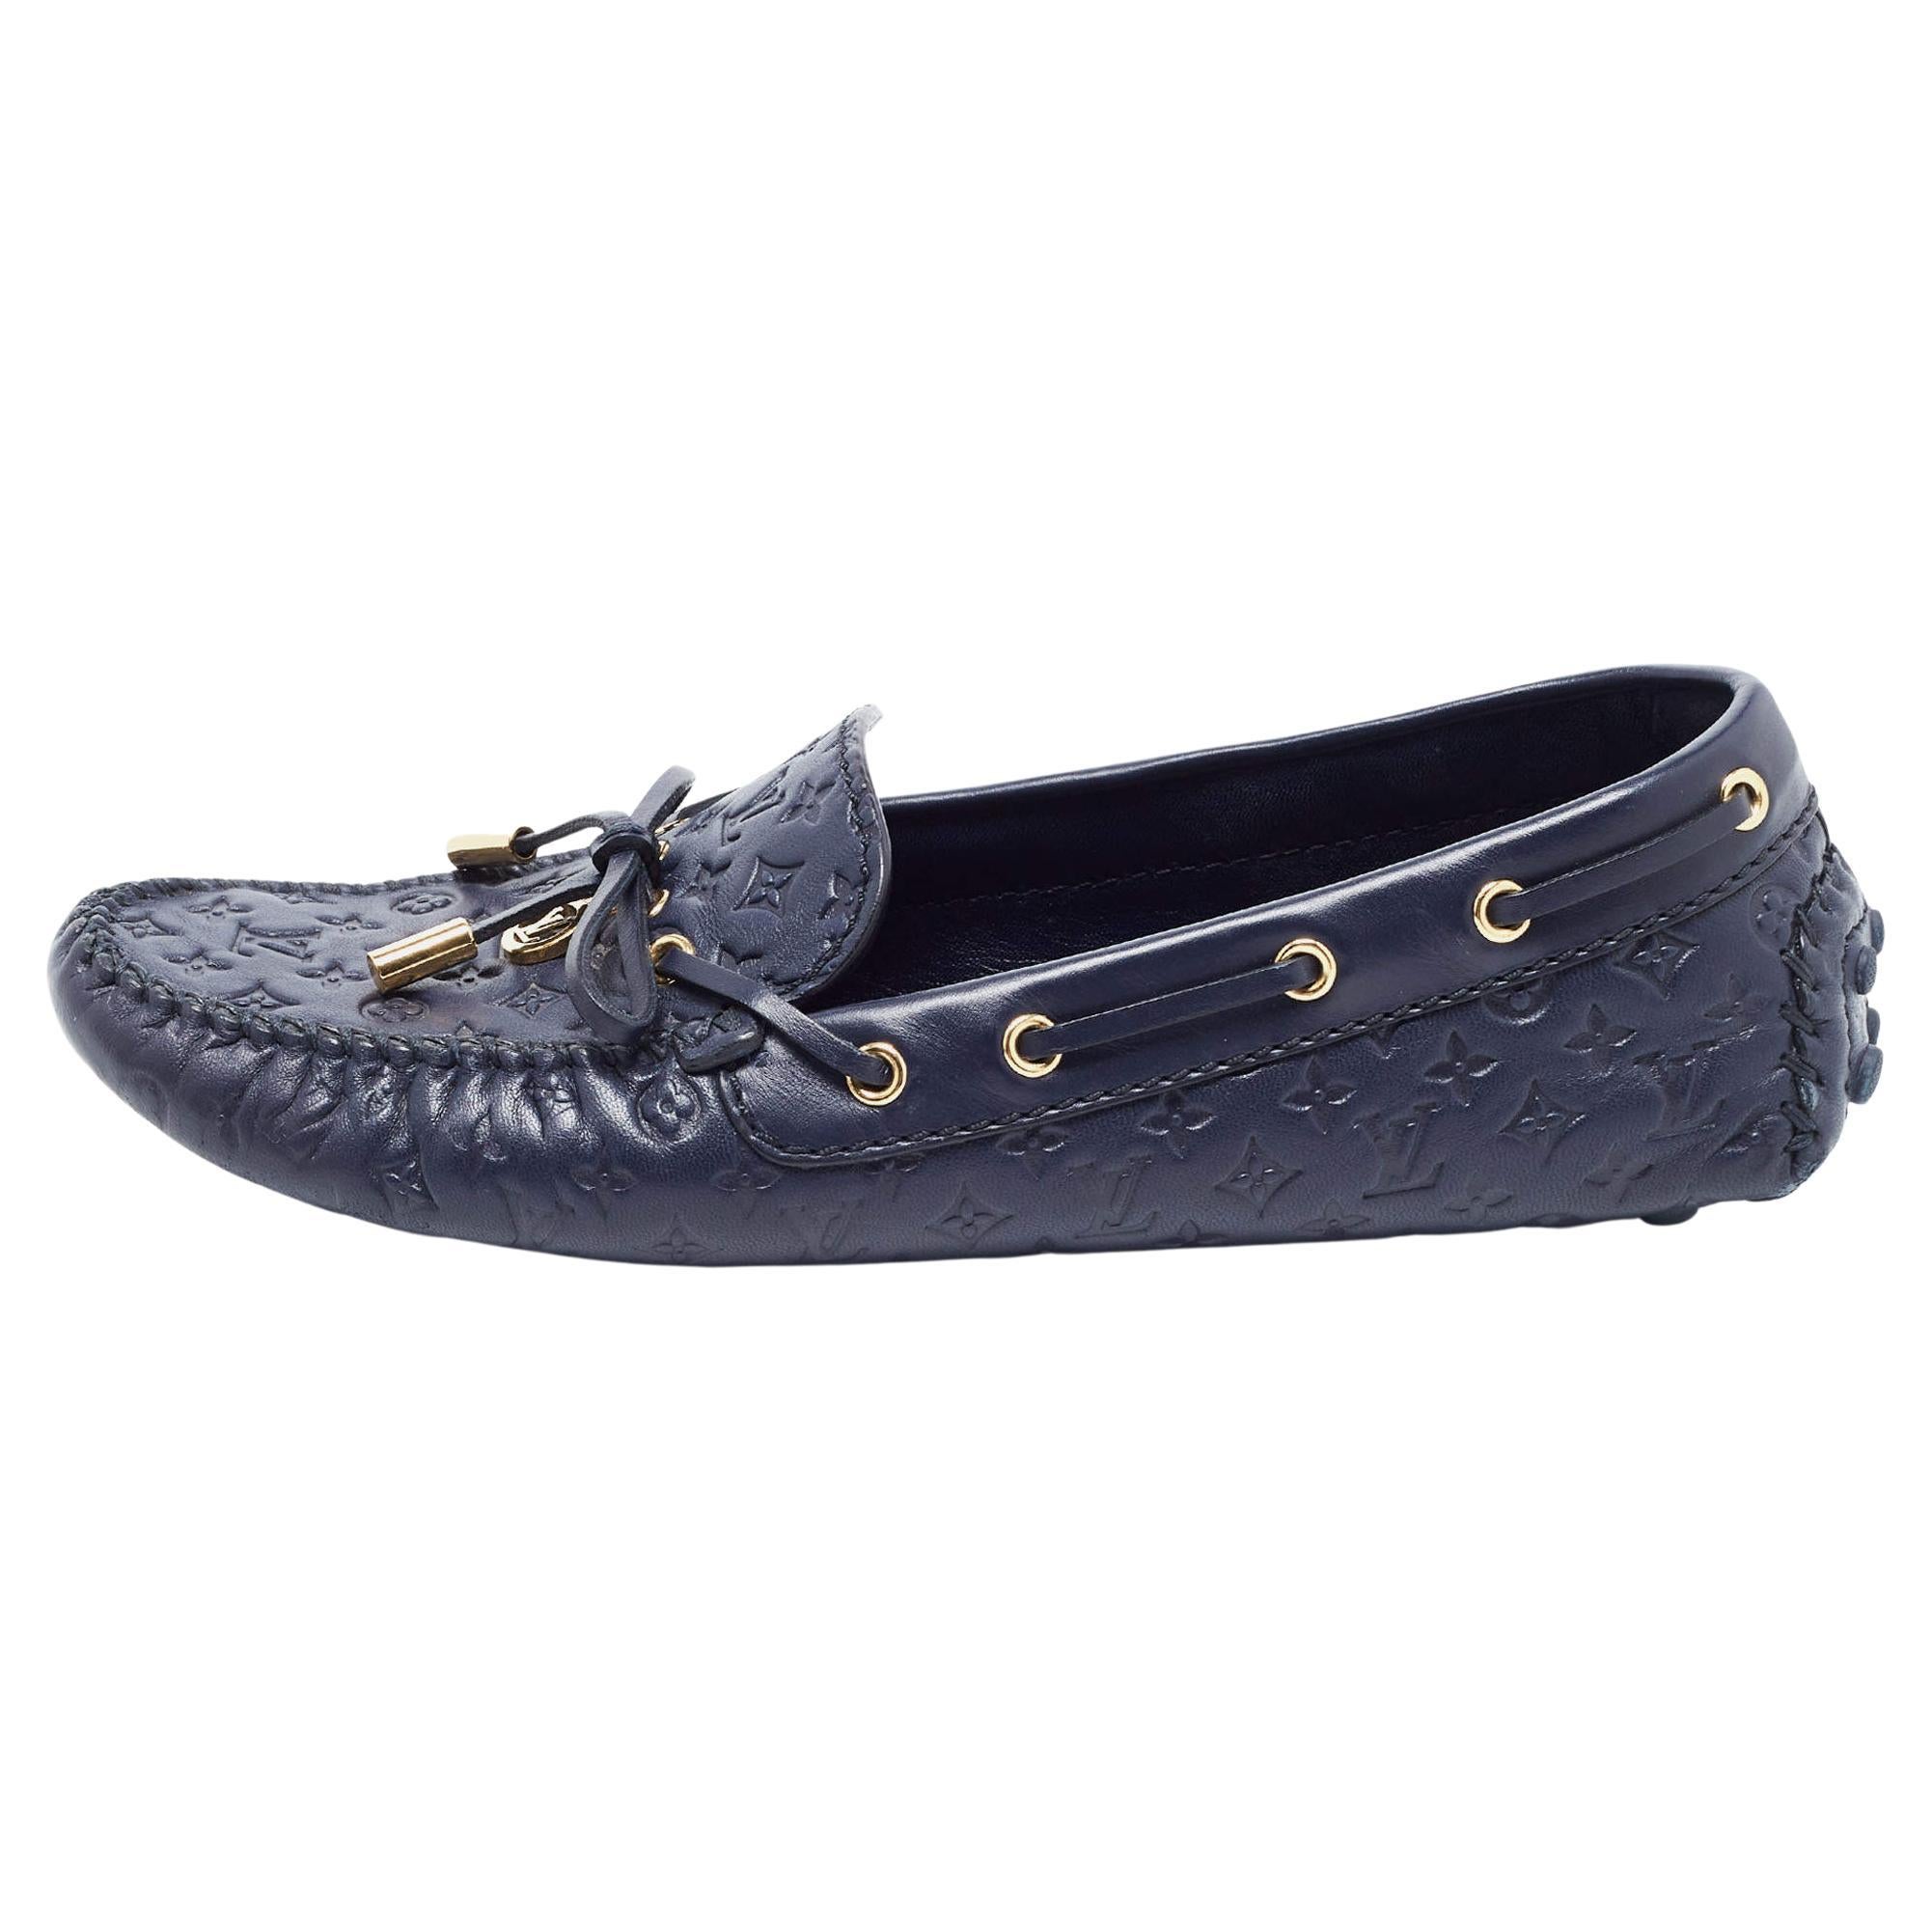 Louis Vuitton Navy Blue Leather Gloria Bow Slip On Loafers Size 39